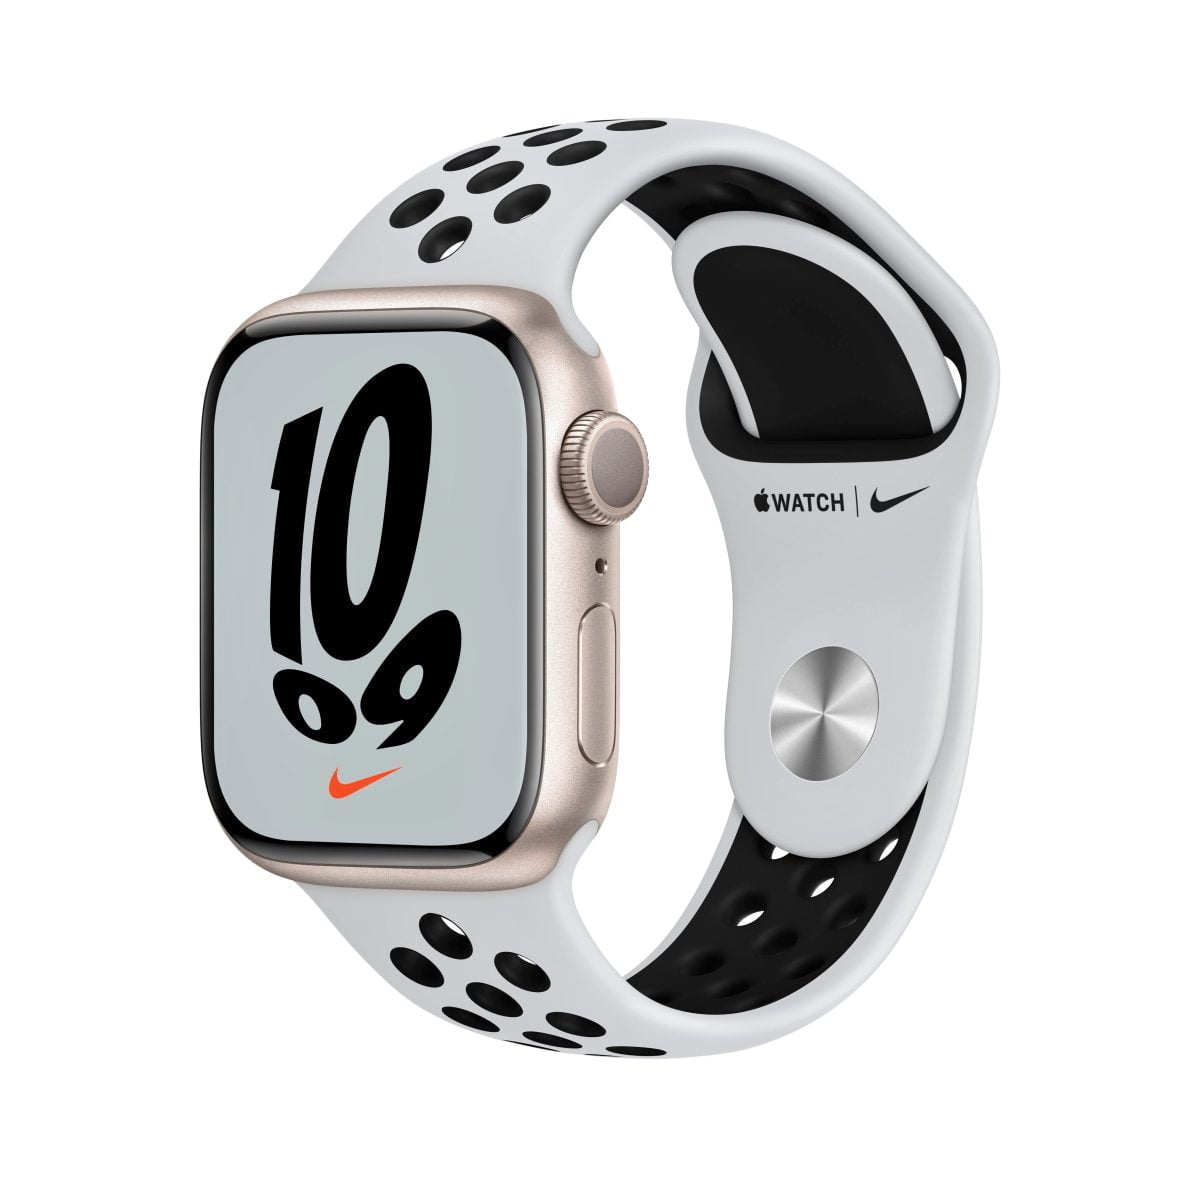 5706674 Sd Scaled Apple &Amp;Lt;H1 Class=&Amp;Quot;Heading-5 V-Fw-Regular&Amp;Quot;&Amp;Gt;Apple Watch Nike Series 7 (Gps) 41Mm Starlight Aluminum Case With Pure Platinum/Black Nike Sport Band - Starlight&Amp;Lt;/H1&Amp;Gt; &Amp;Lt;H2&Amp;Gt;Model: Mkn33&Amp;Lt;/H2&Amp;Gt; Https://Www.youtube.com/Watch?V=Mmdq-Gwbnze &Amp;Lt;Div Class=&Amp;Quot;Long-Description-Container Body-Copy &Amp;Quot;&Amp;Gt; &Amp;Lt;Div Class=&Amp;Quot;Html-Fragment&Amp;Quot;&Amp;Gt; &Amp;Lt;Div&Amp;Gt; &Amp;Lt;Div&Amp;Gt;The Largest, Most Advanced Always-On Retina Display Yet Makes Everything You Do With Your Apple Watch Series 7 Bigger And Better. Series 7 Is The Most Durable Apple Watch Ever Built, With An, Even More, Crack-Resistant Front Crystal. Advanced Features Let You Measure Your Blood Oxygen Level,¹ Take An Ecg Anytime,² And Access Mindfulness And Sleep Tracking Apps. You Can Also Track Dozens Of Workouts, Including New Tai Chi And Pilates.&Amp;Lt;/Div&Amp;Gt; &Amp;Lt;/Div&Amp;Gt; &Amp;Lt;/Div&Amp;Gt; &Amp;Lt;/Div&Amp;Gt; Apple Watch Nike Series Apple Watch Nike Series 7 (Gps) 41Mm - Starlight